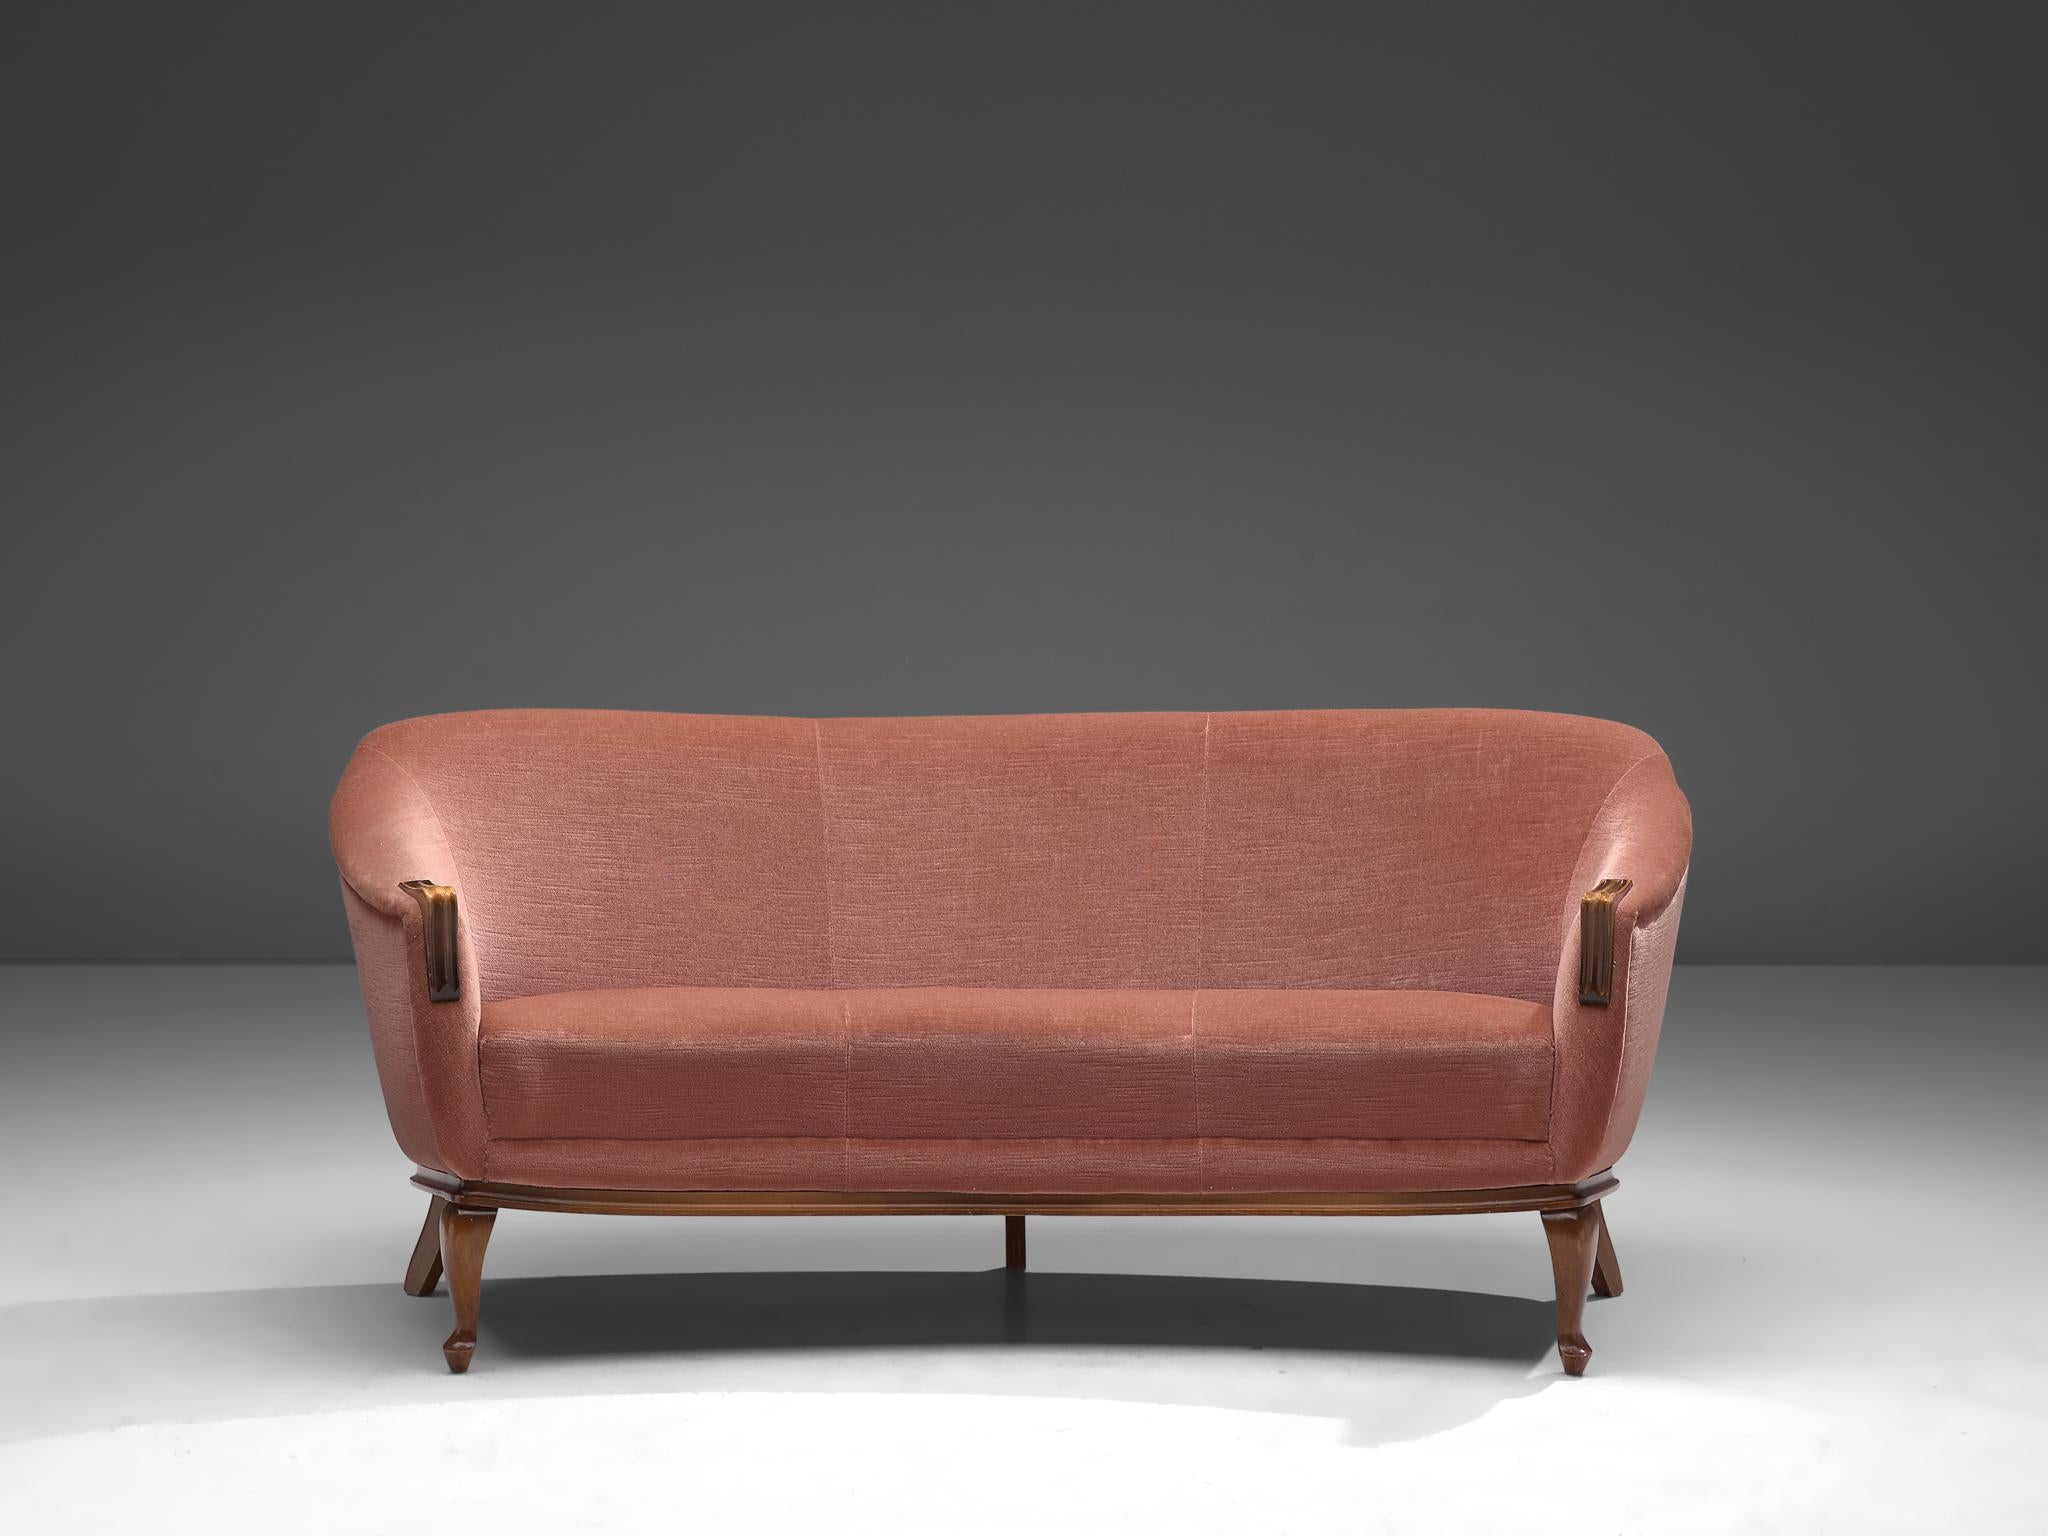 Three-seat sofa, velvet and oak, Denmark, 1940s

This curved three-seat sofa with soft pink sofa shows characteristics of late art deco and start of Scandinavian Modern. The sofa is slightly curved which is emphasized by the high, smooth backrest